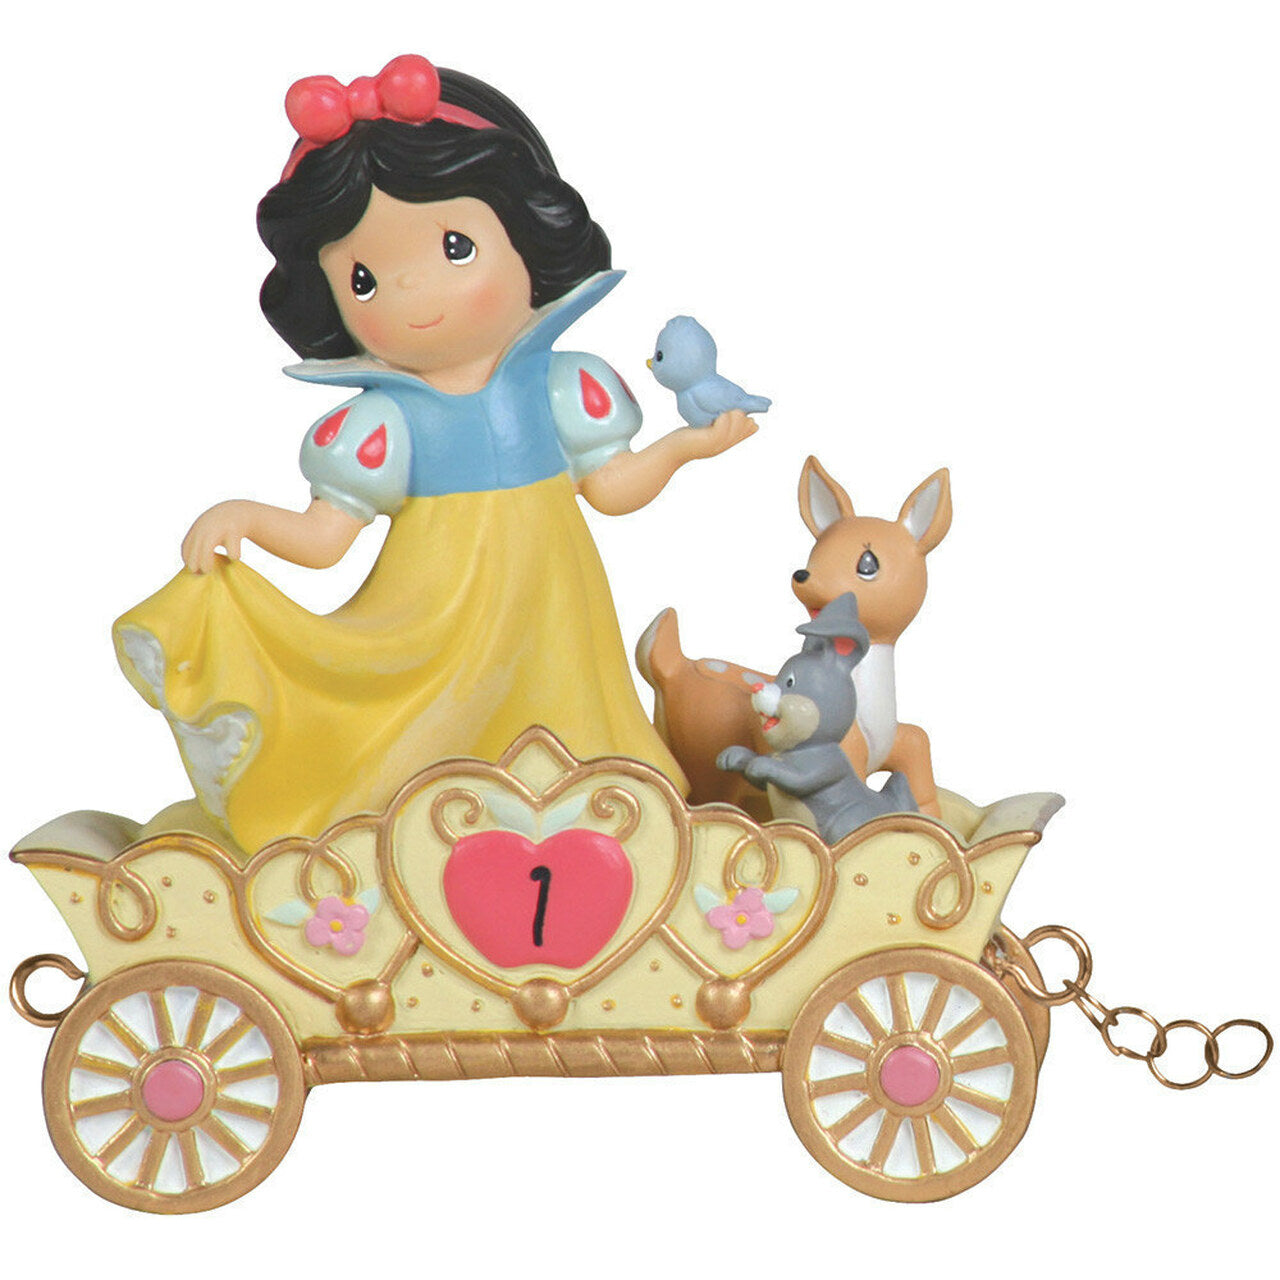 Disney Birthday Parade May Your Birthday Be The Fairest Of Them All, Age 1, Figurine